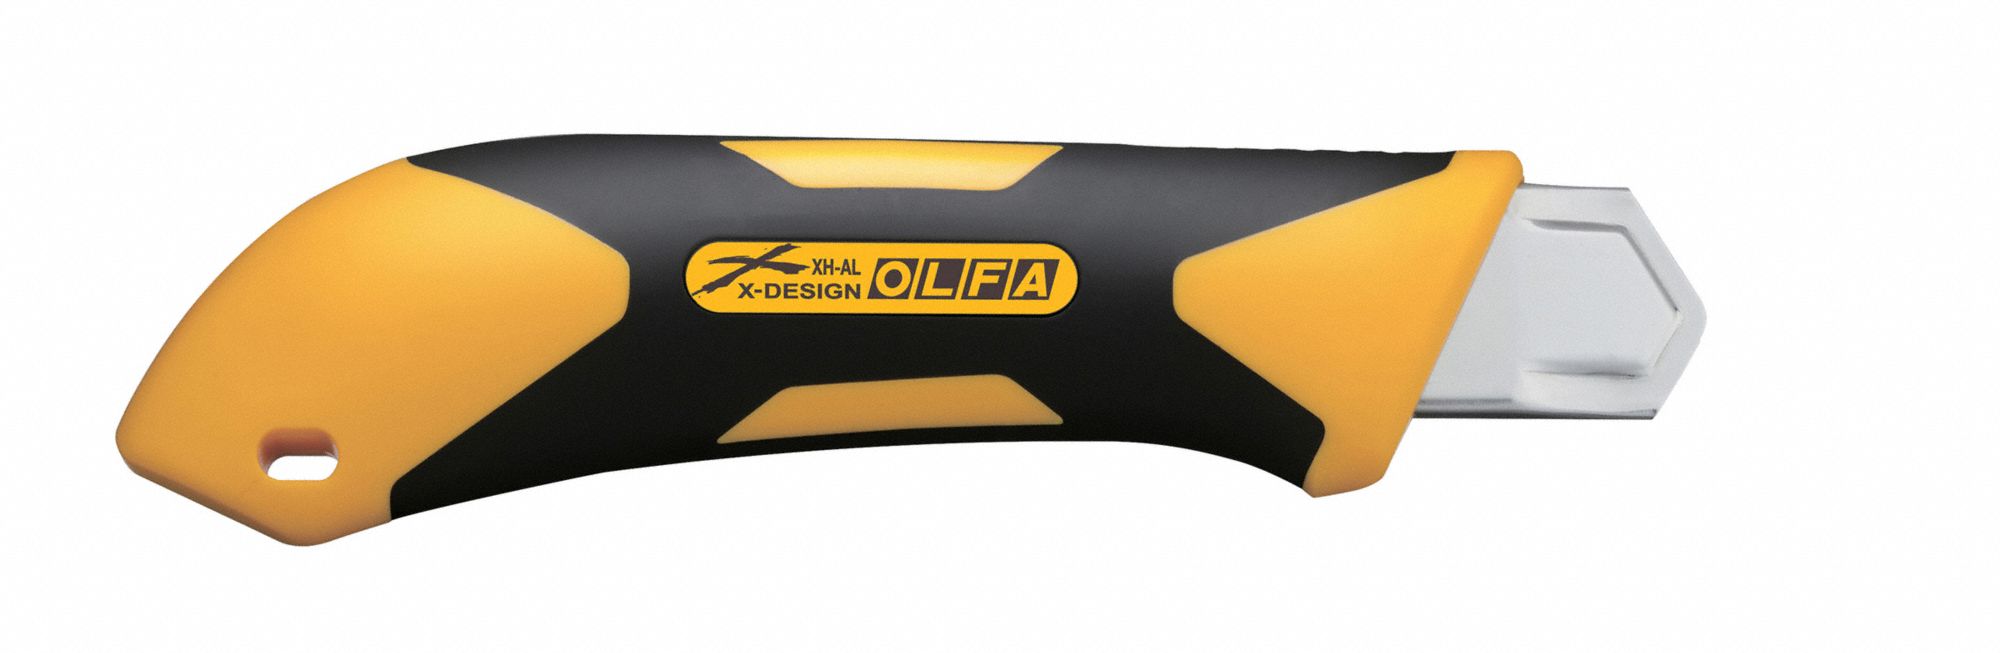 Utility Knife: 7 1/2 in Overall Lg, Rubberized, 7 Segments, 0 Blades Stored, Black/Yellow